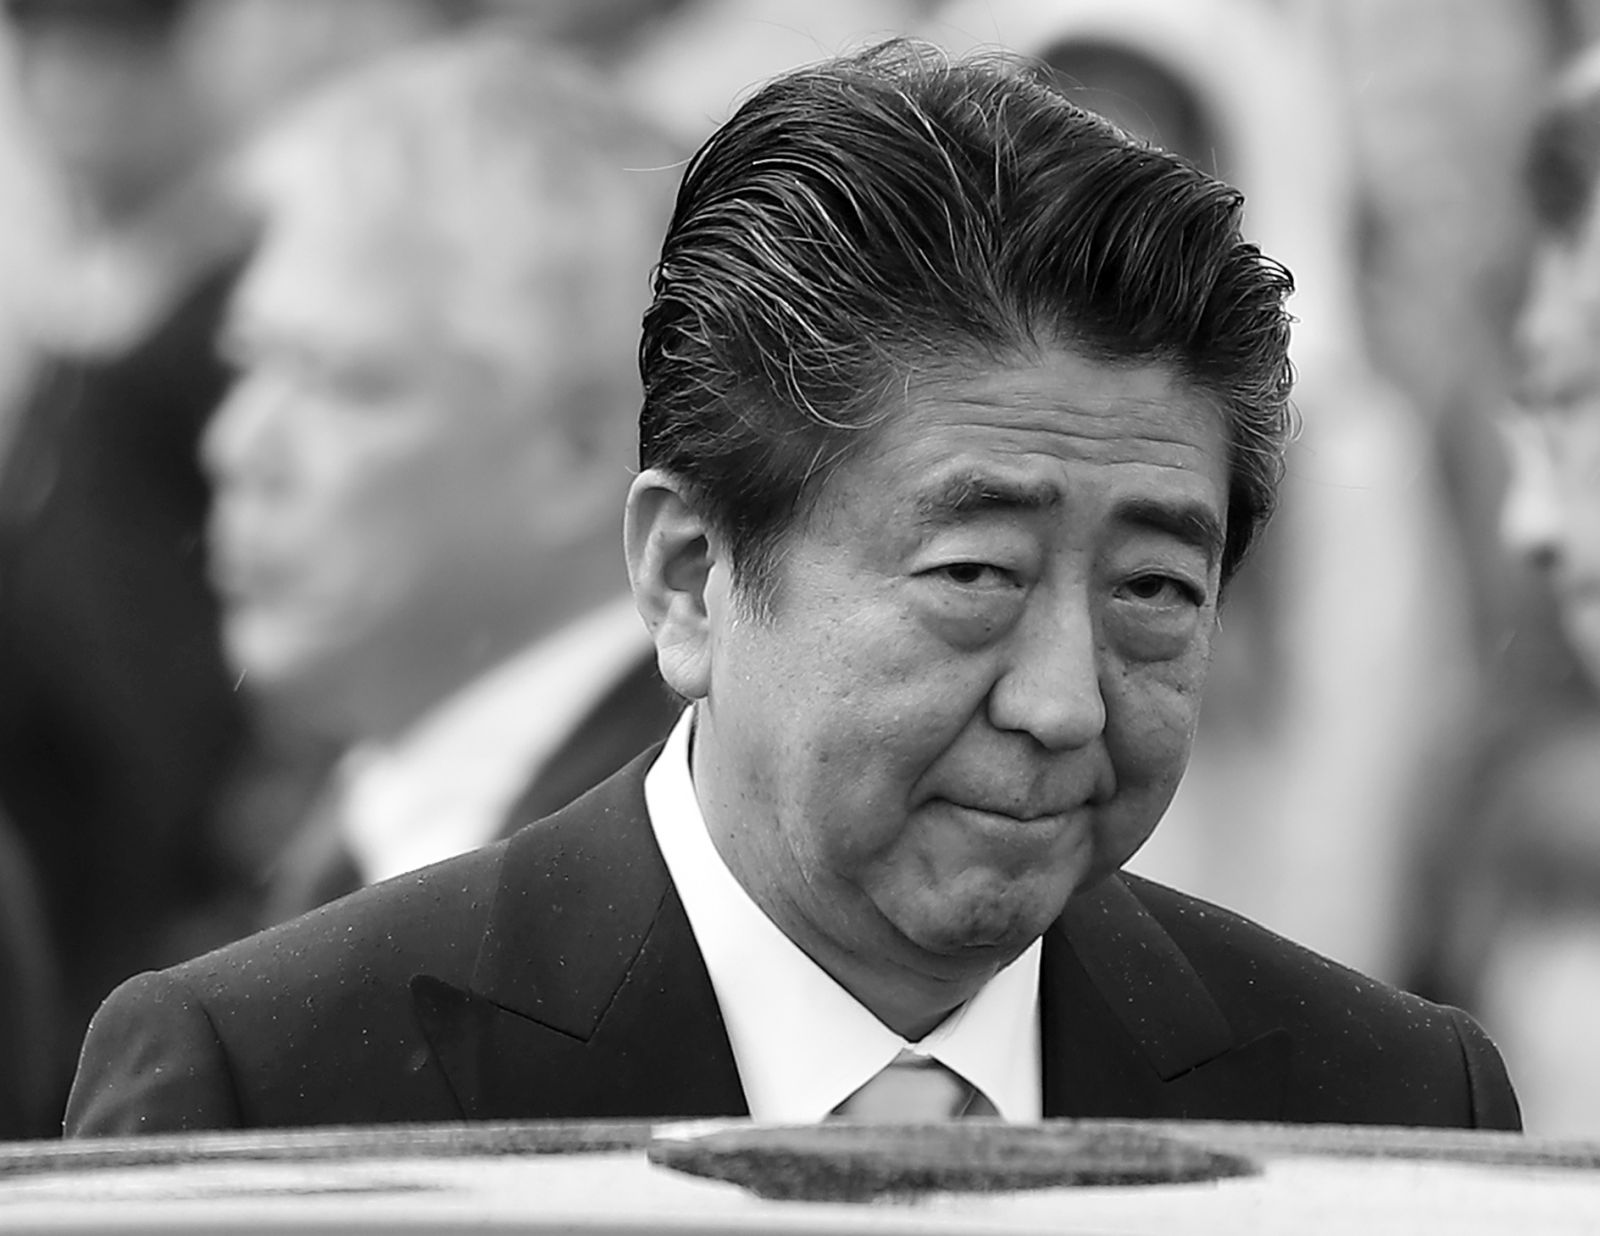 epa10058747 (FILE) - Japanese Prime Minister Shinzo Abe looks on as he leaves the Ground Self Defense Force's Asaka training ground after reviewing troops in Asaka, near Tokyo, Japan, 14 October 2018 (reissued 08 July 2022). According to Japan's national broadcaster, former Prime Minister Shinzo Abe died of his injuries on 08 July 2022, hours after being shot during an Upper House election campaign act to support a party candidate, outside a railway station in Nara, western Japan. He was 67. Abe had served as Japan's prime minister from 2006 to 2007 and again from 2012 to 2020. He was the longest-serving prime minister in the history of the country.  EPA/FRANCK ROBICHON *** Local Caption *** 54699196